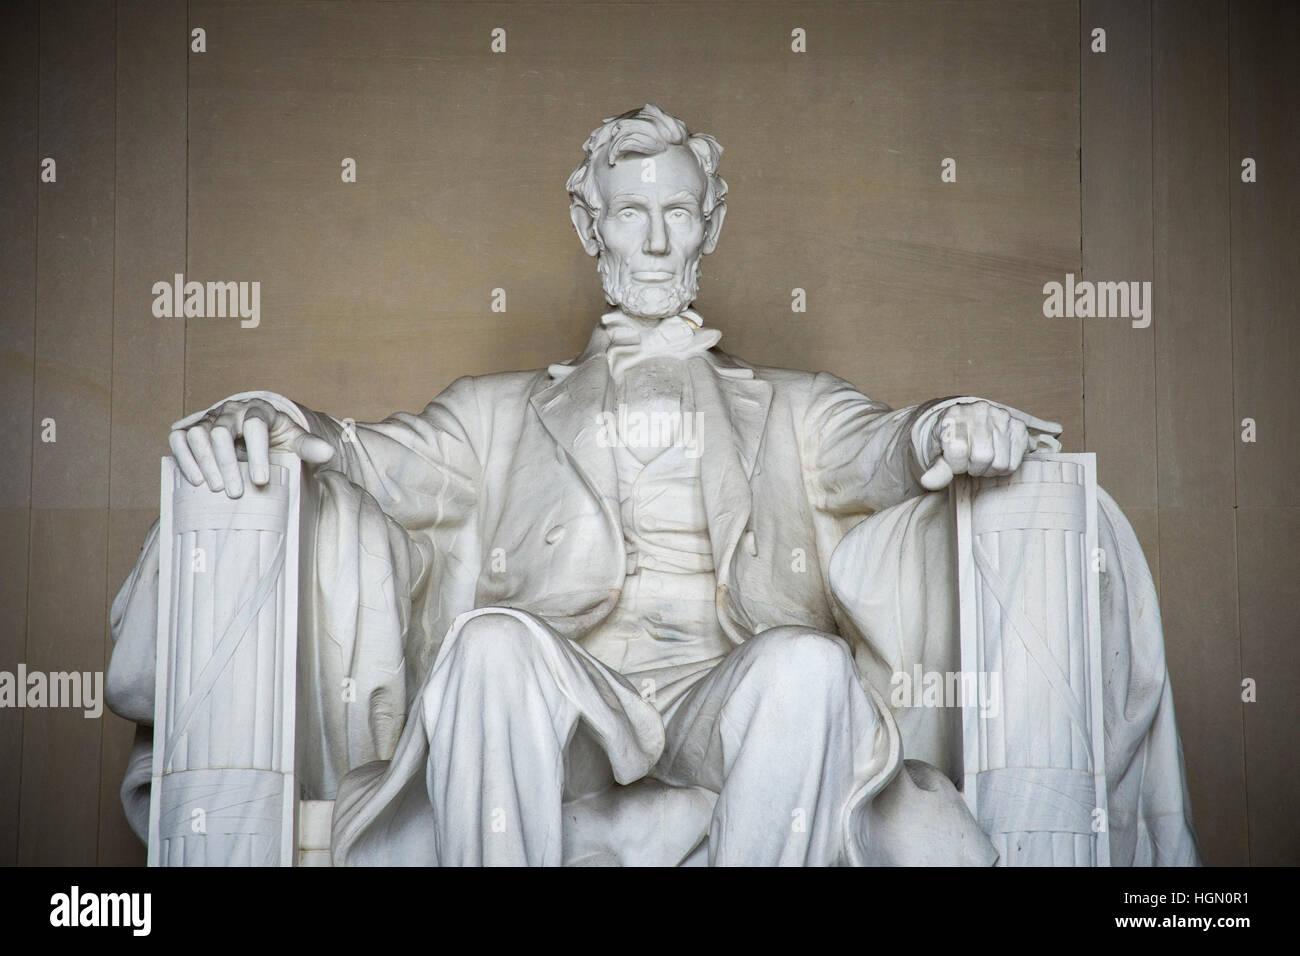 Iconic statue of Abraham Lincoln, sculpted by Daniel Chester French, is in the Lincoln Memorial in Washington DC. Stock Photo